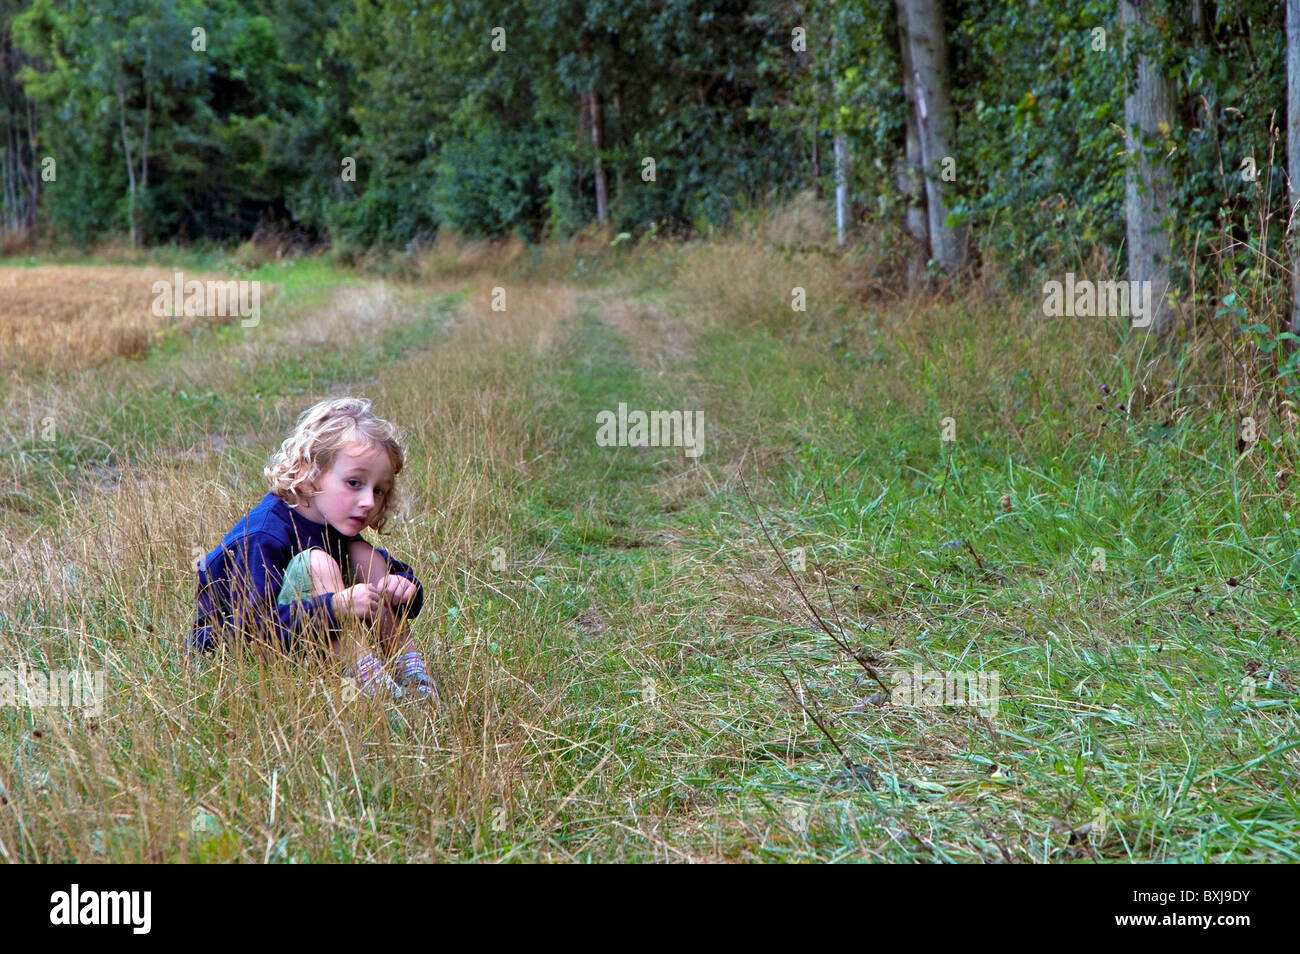 Four year old girl sitting alone in the grass beside a forest, France. Stock Photo